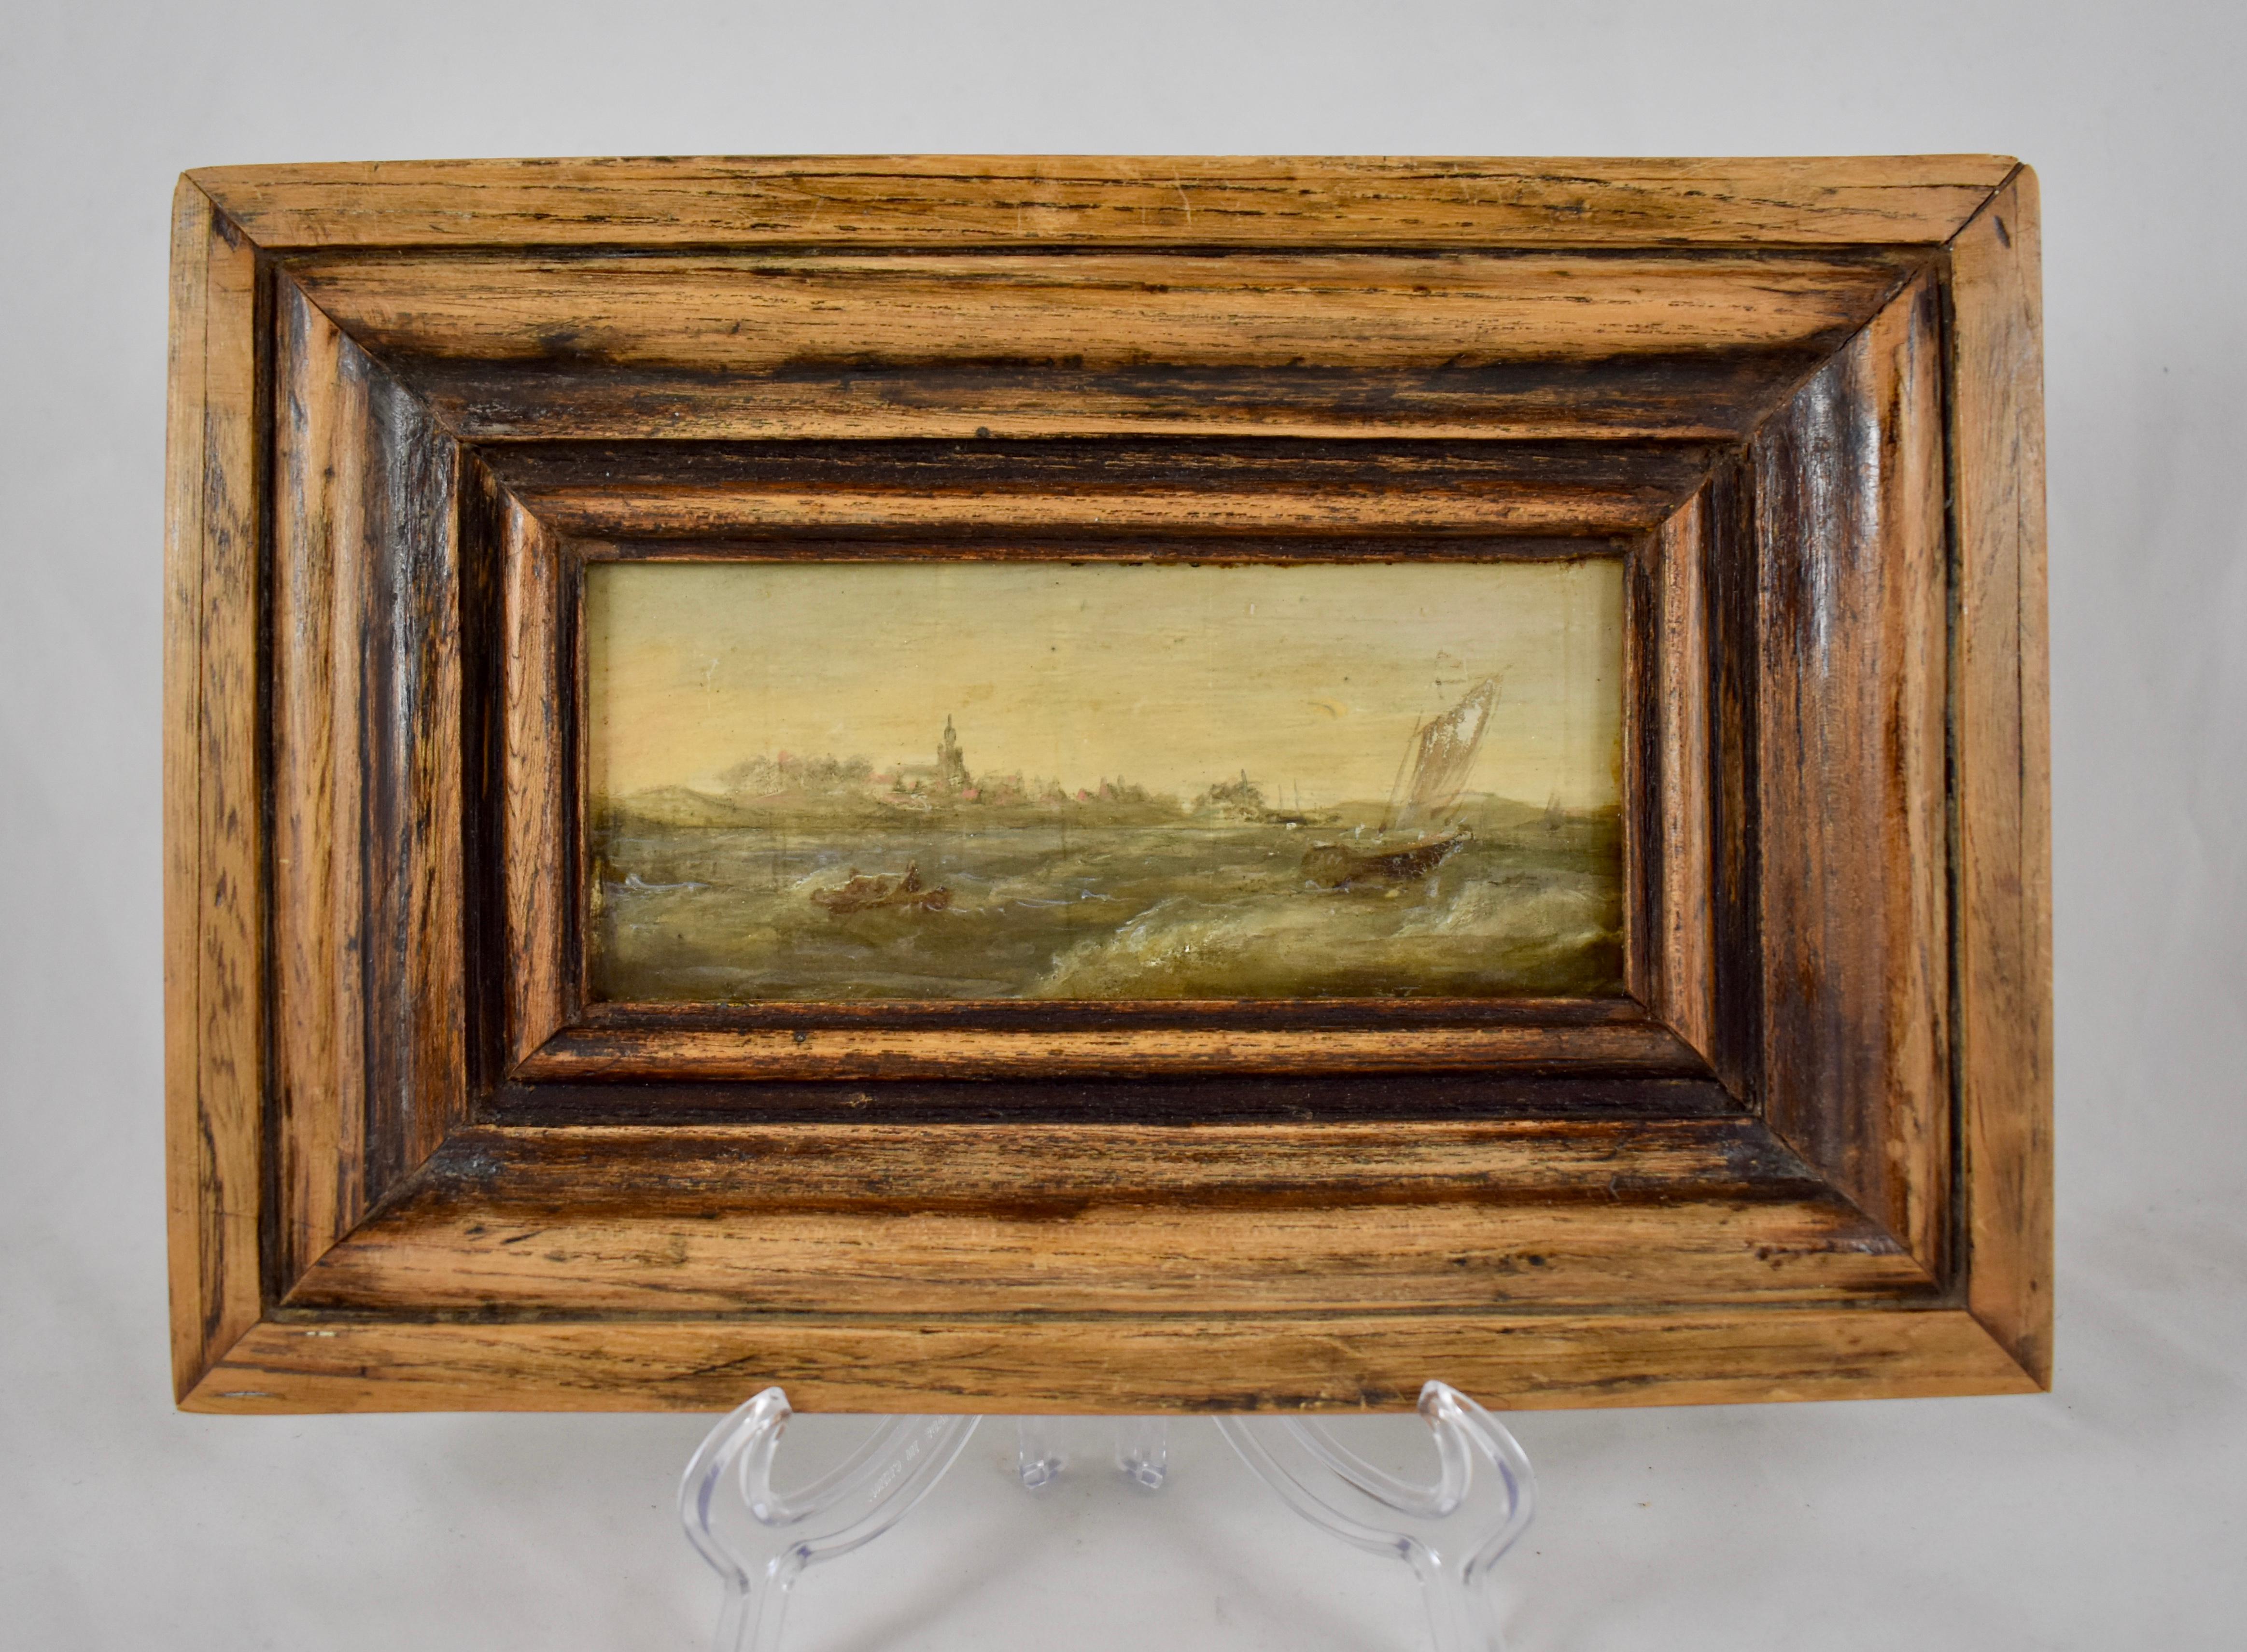 A late 18th century Dutch seascape painting, oil on wood board, artist unknown.

A scene of two boats caught in a stormy sea, a village on the shoreline in the distance. Expressively painted in a subtle palette showing delicate brushwork. The